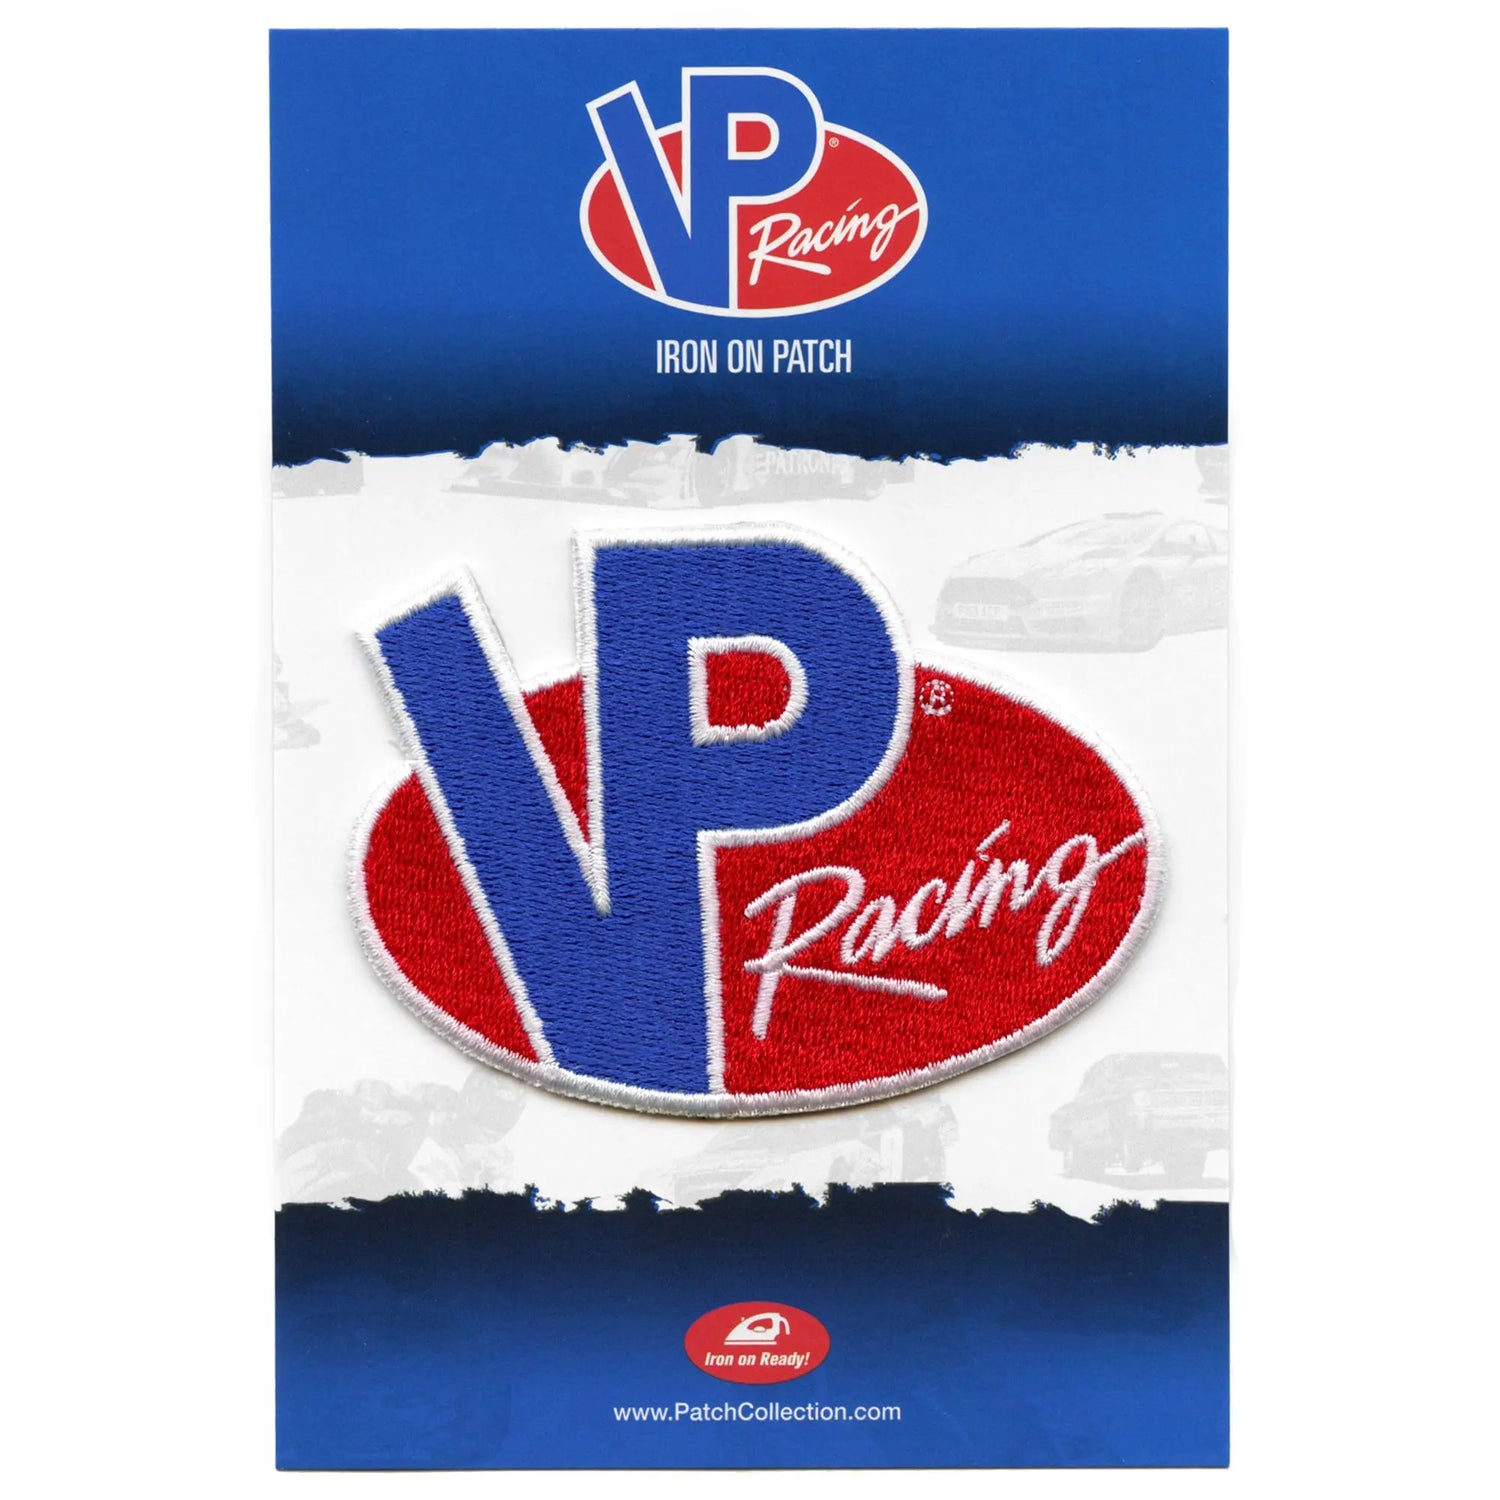 VP Racing® Patches